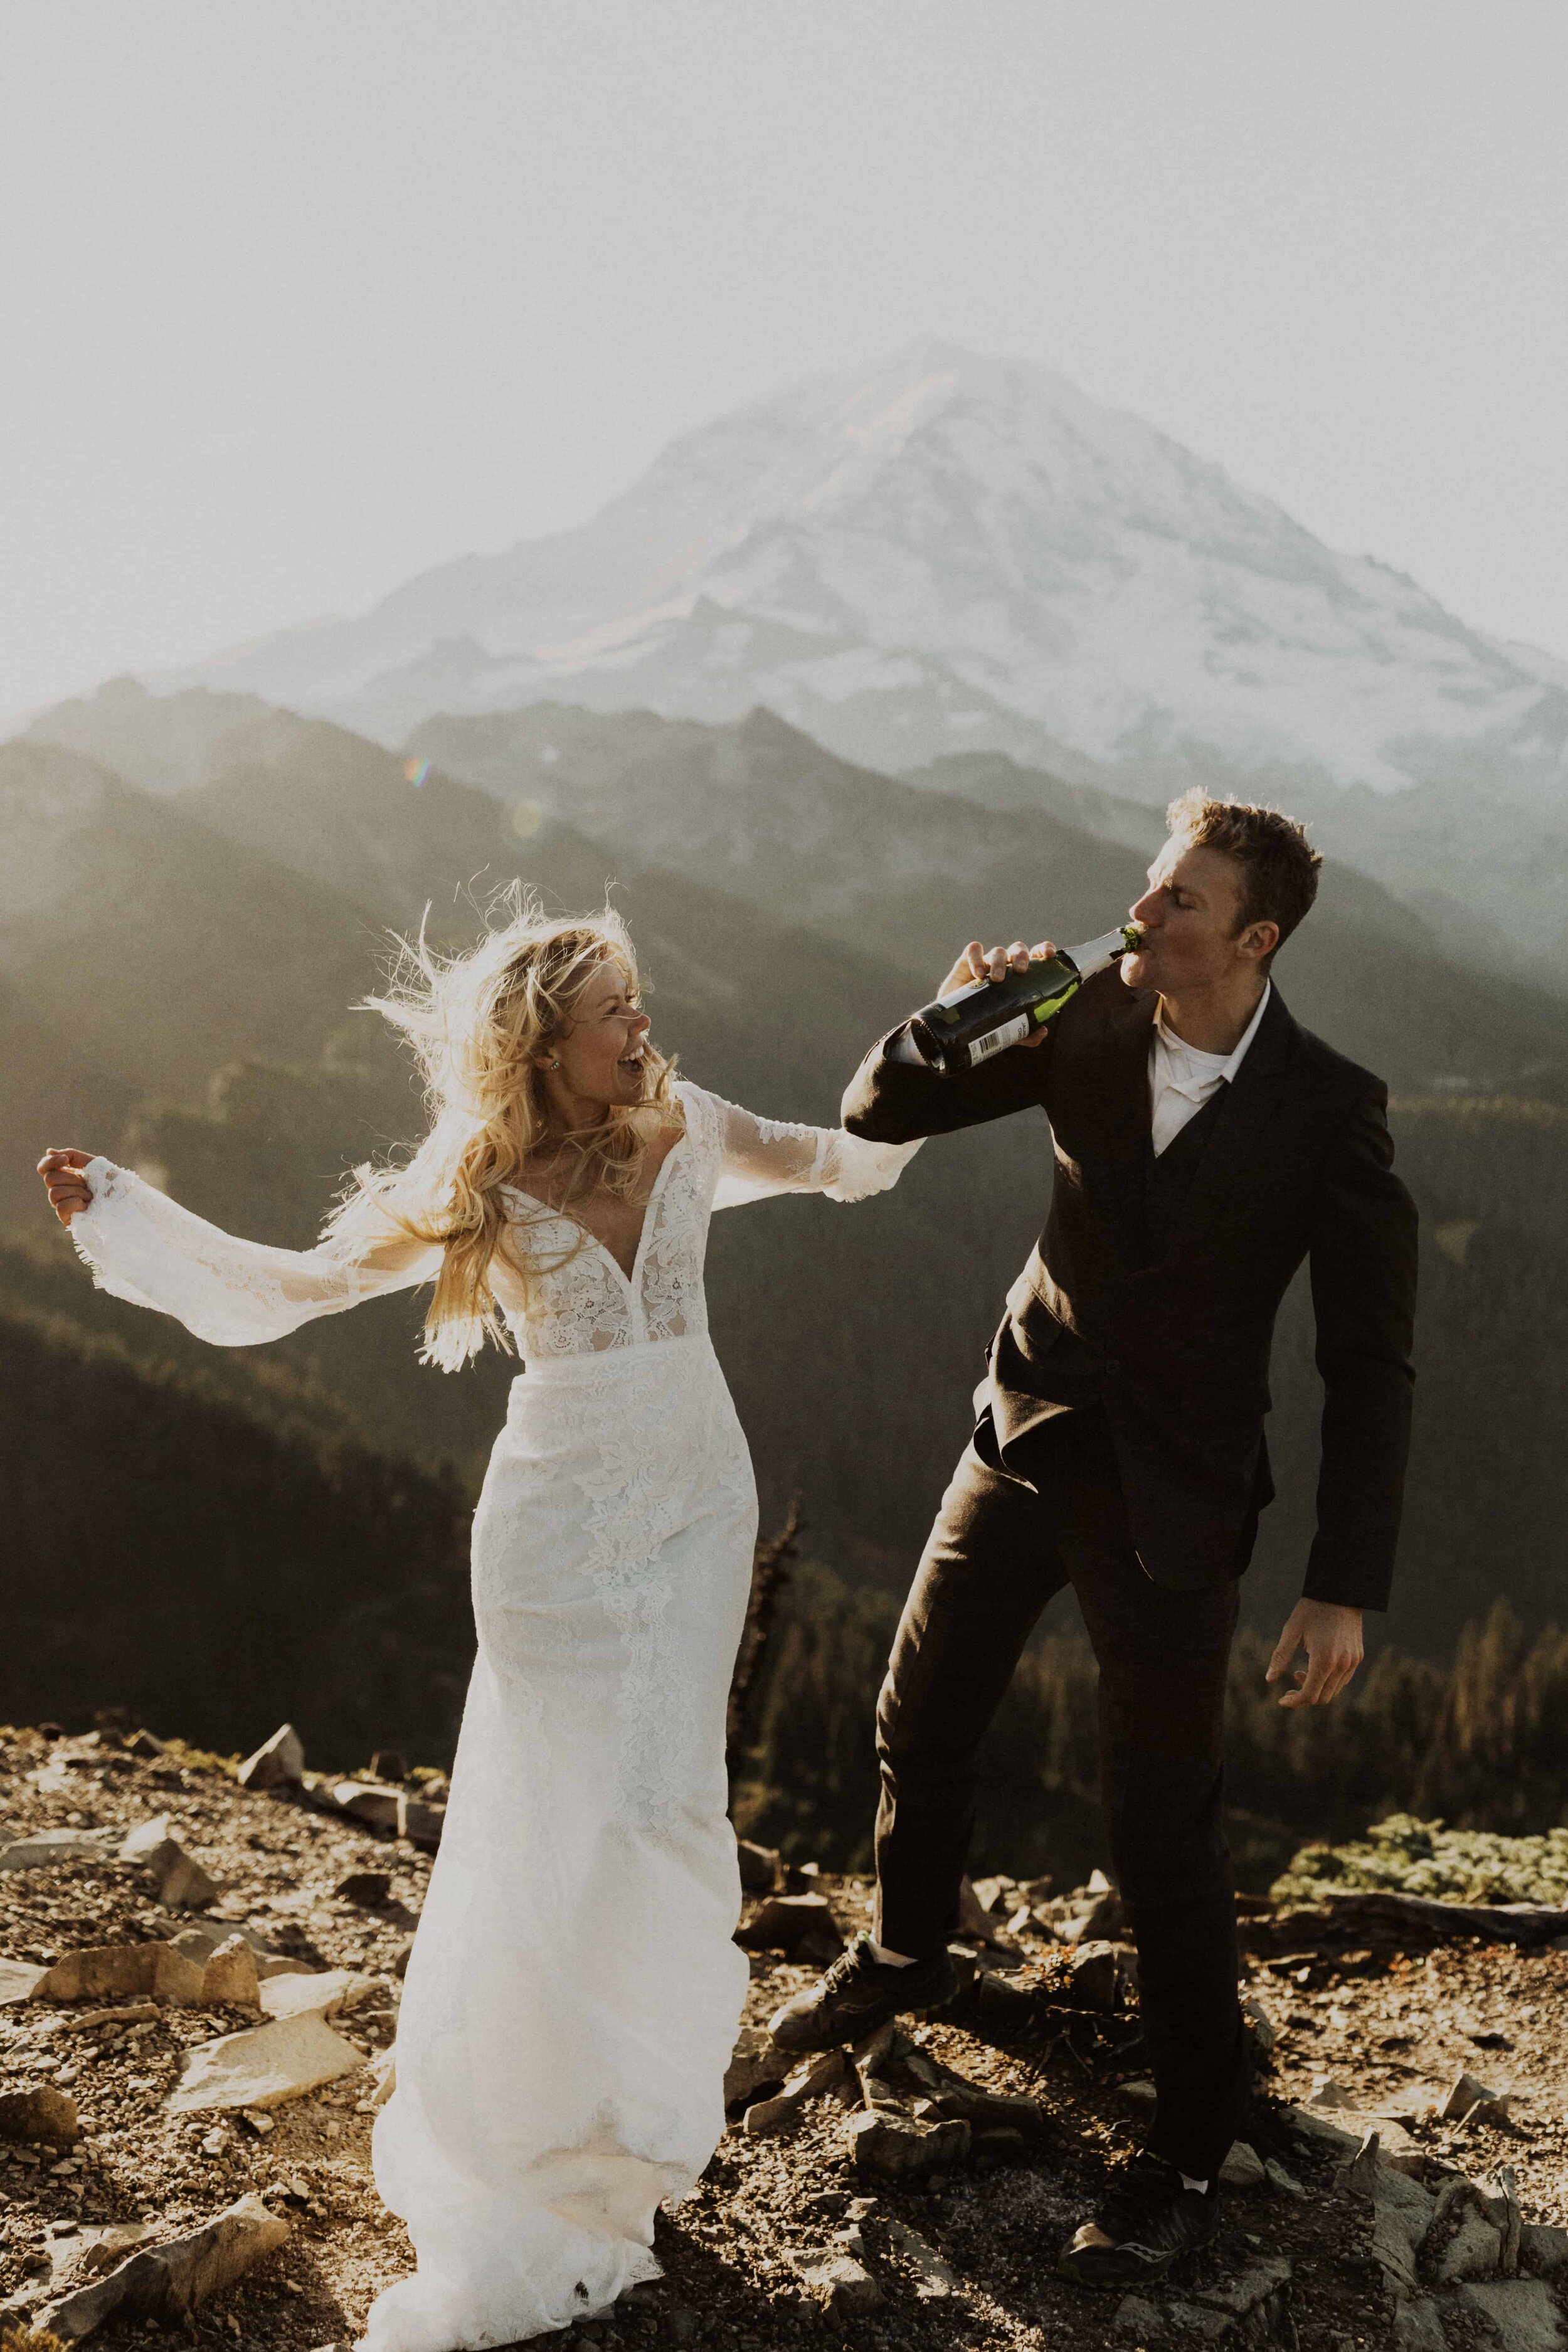 The Ultimate Mountain Elopement Guide- How to get Married in the Mountains